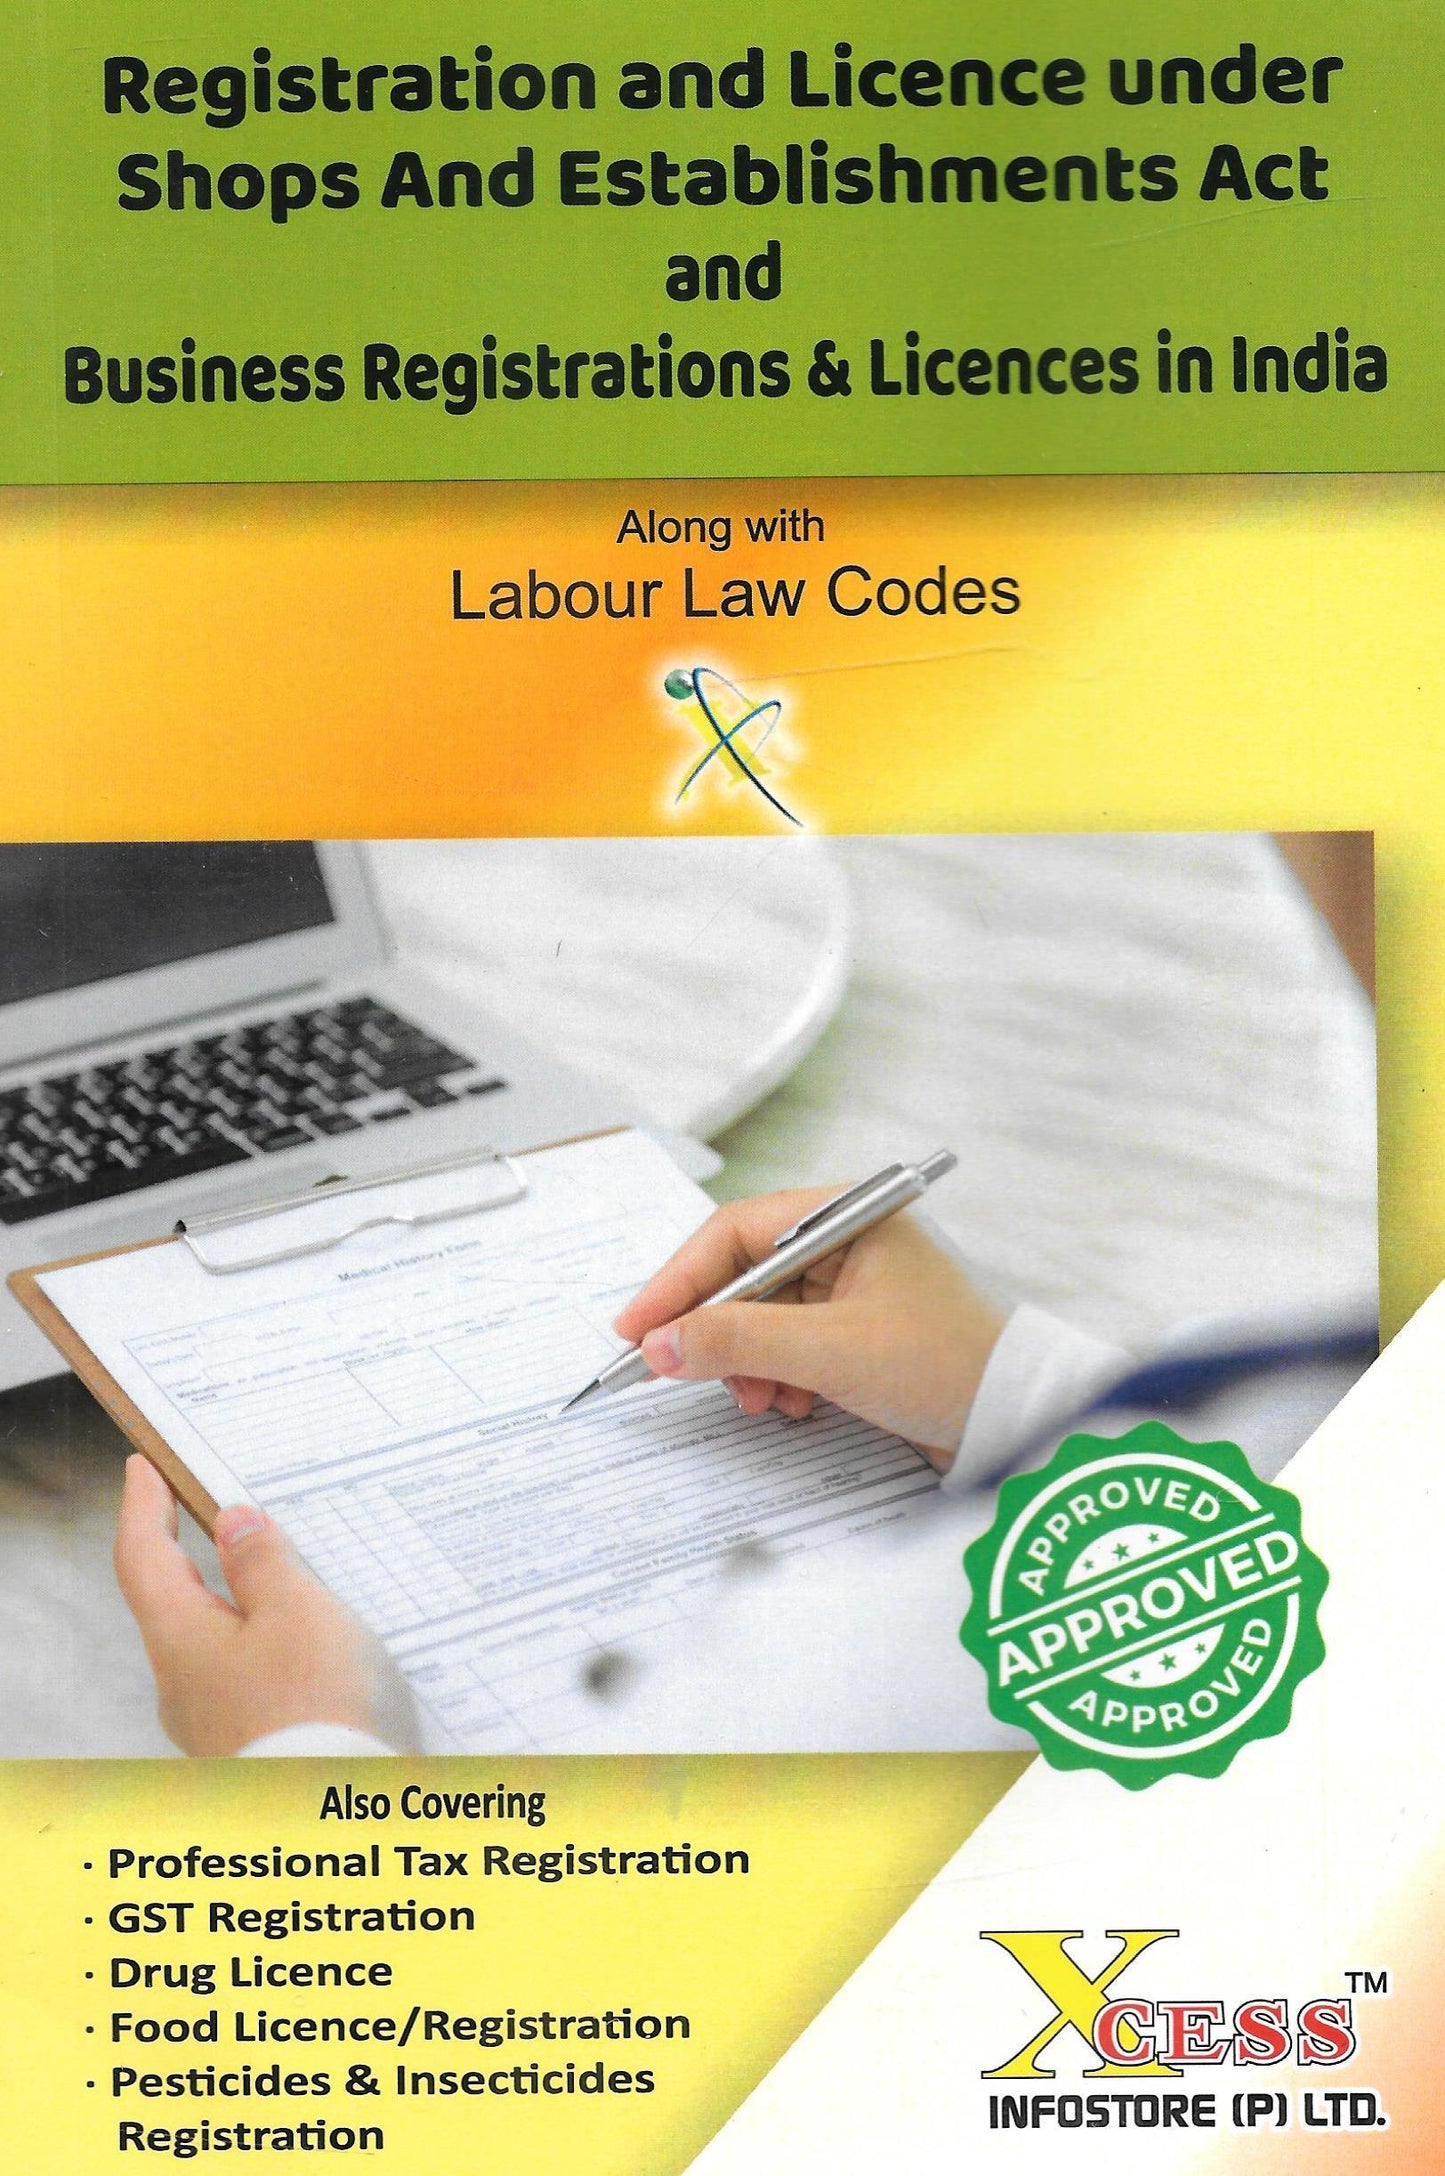 Registration and License under Shops and Establishments Act and Business Registration and Licenses in India